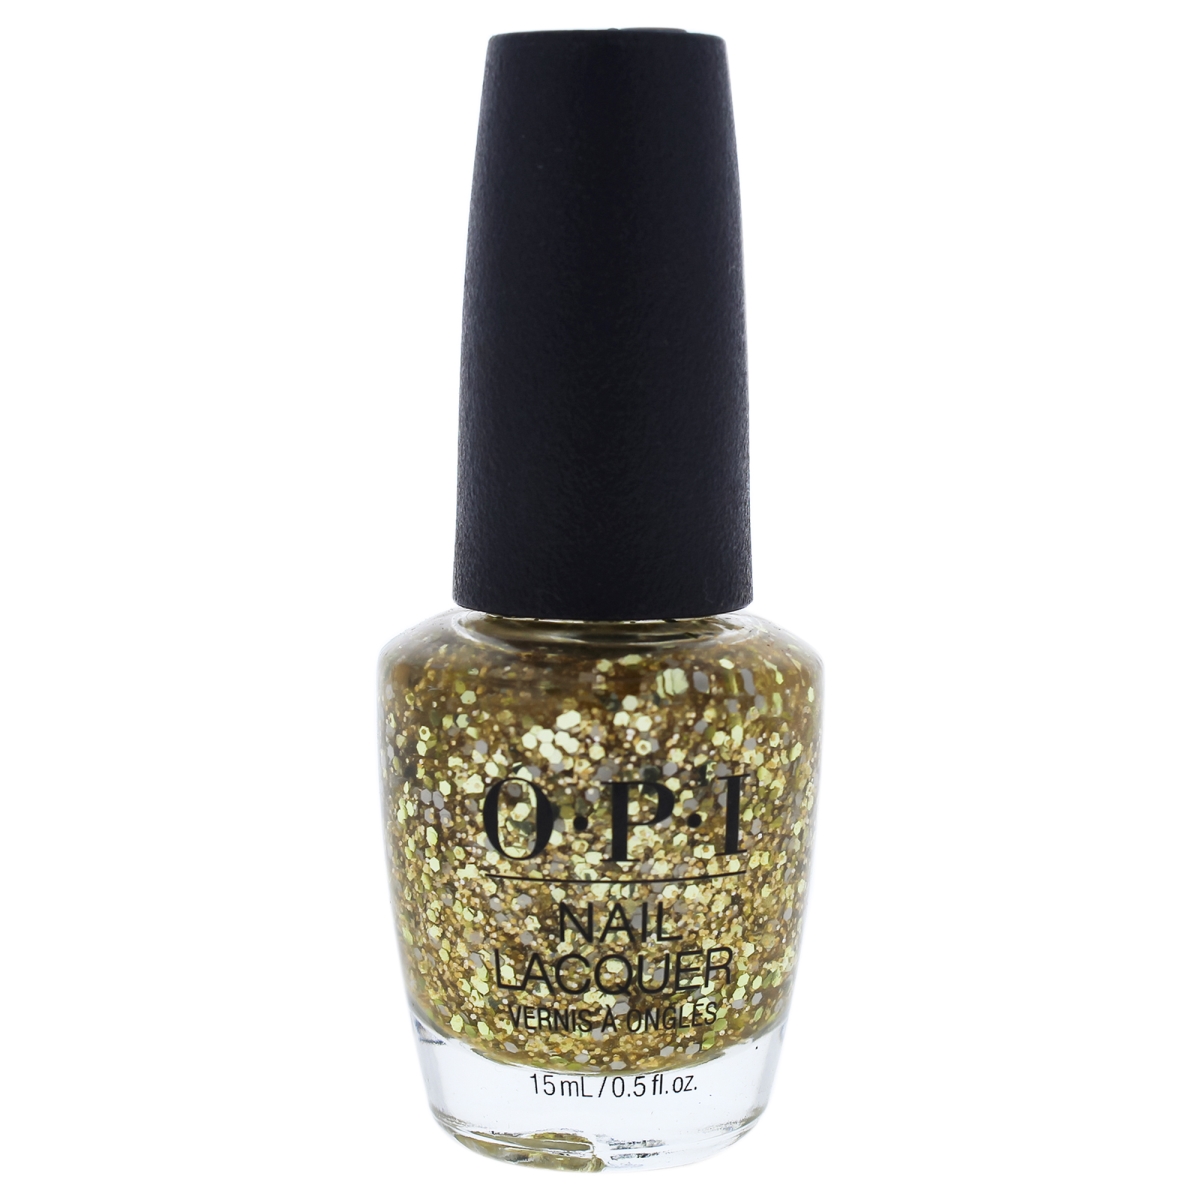 I0088844 Nail Lacquer For Women - Hr K13 Gold Key To The Kingdom - 0.5 Oz